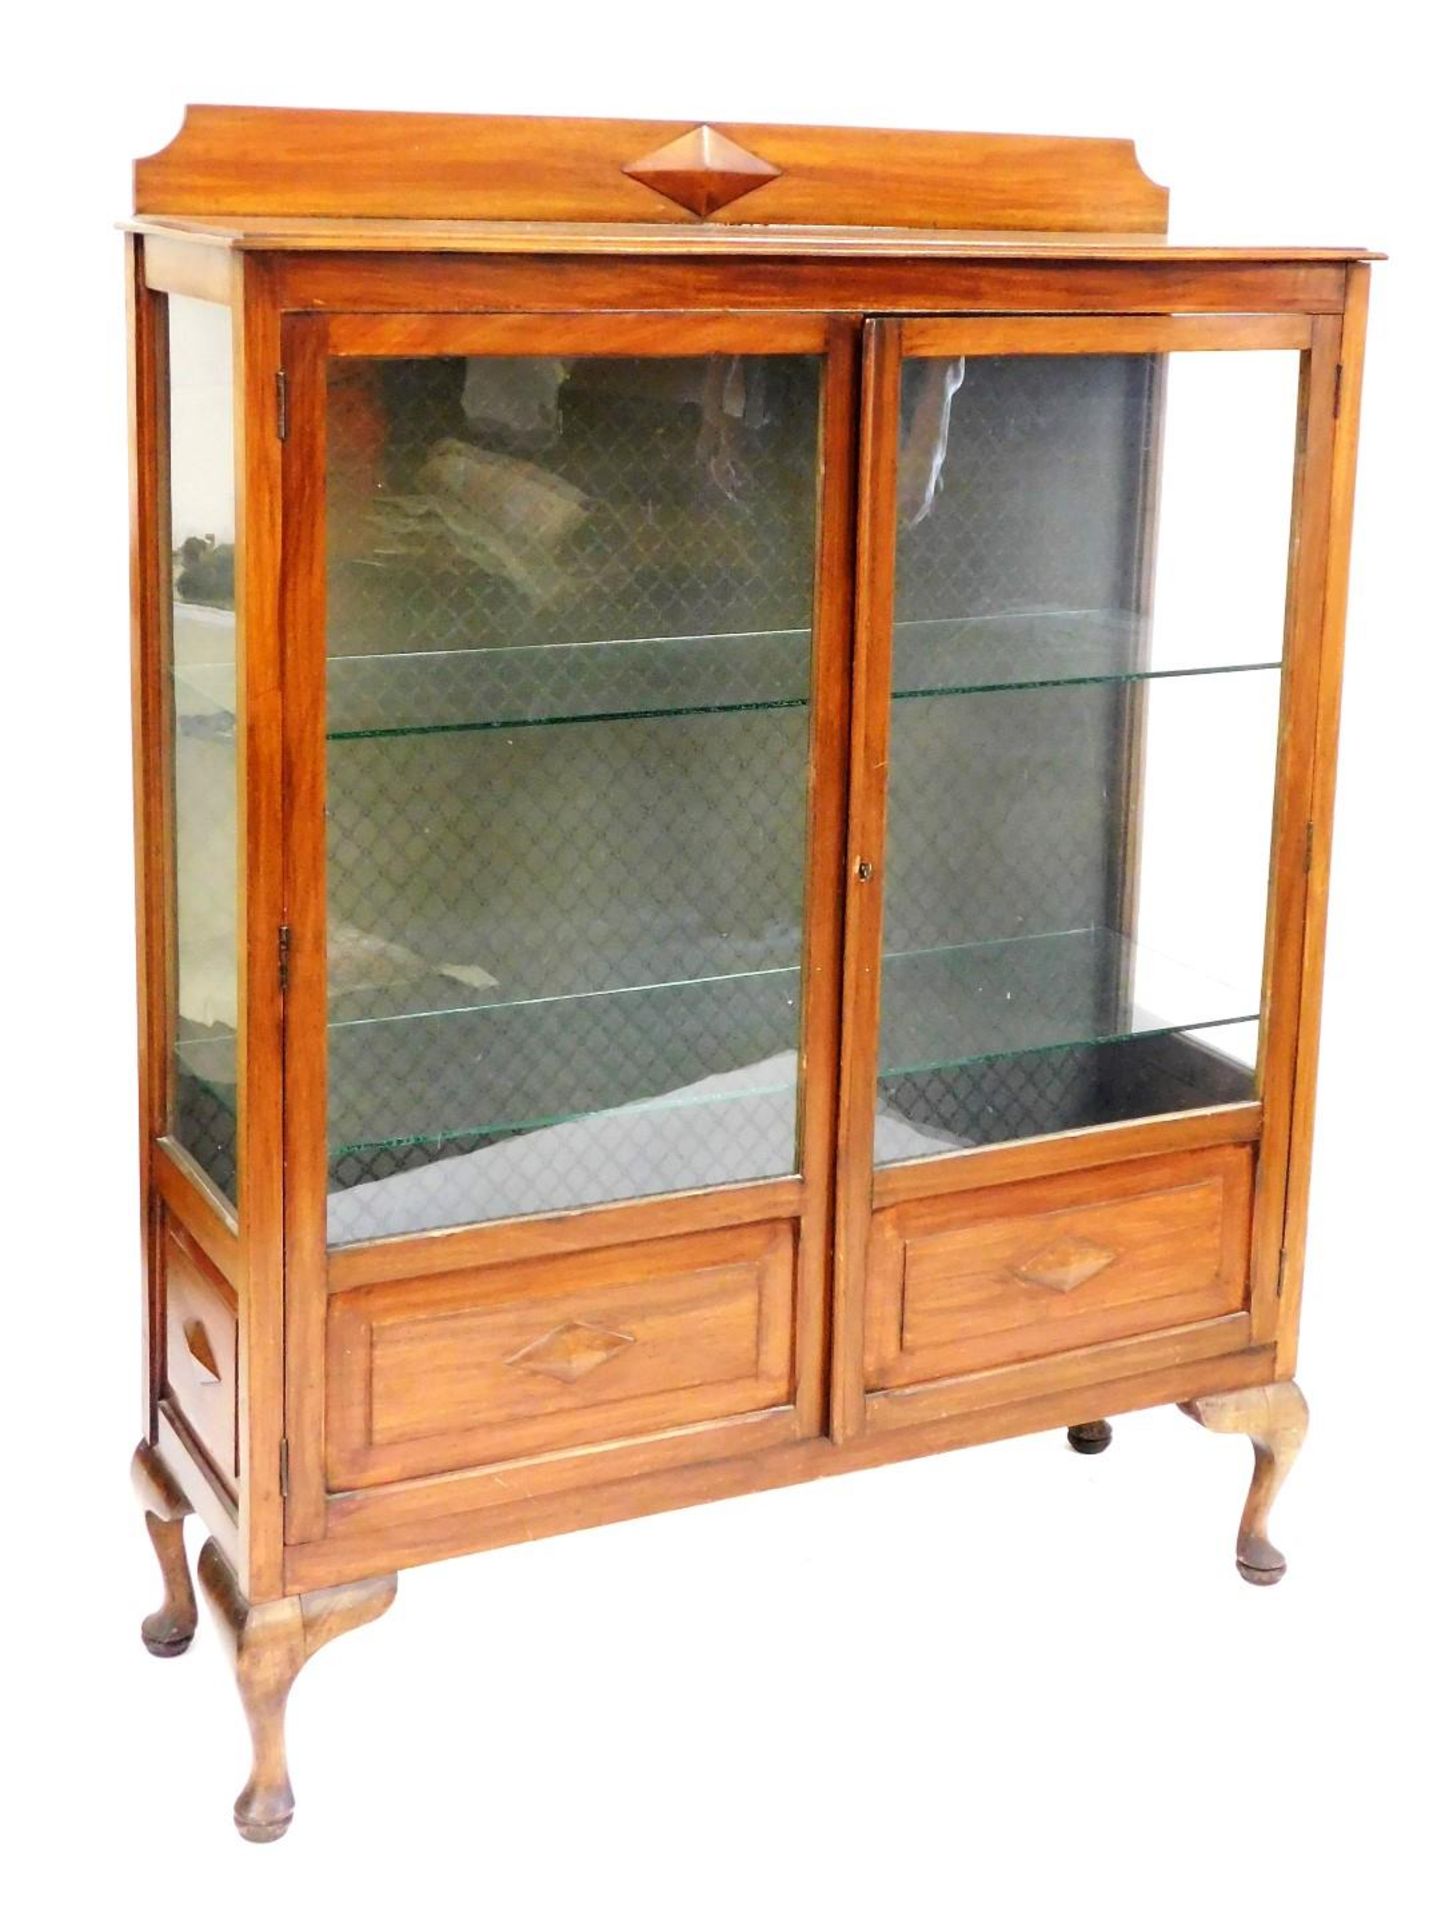 An early 20thC mahogany display cabinet, with a pair of glazed doors enclosing two glass shelves, ra